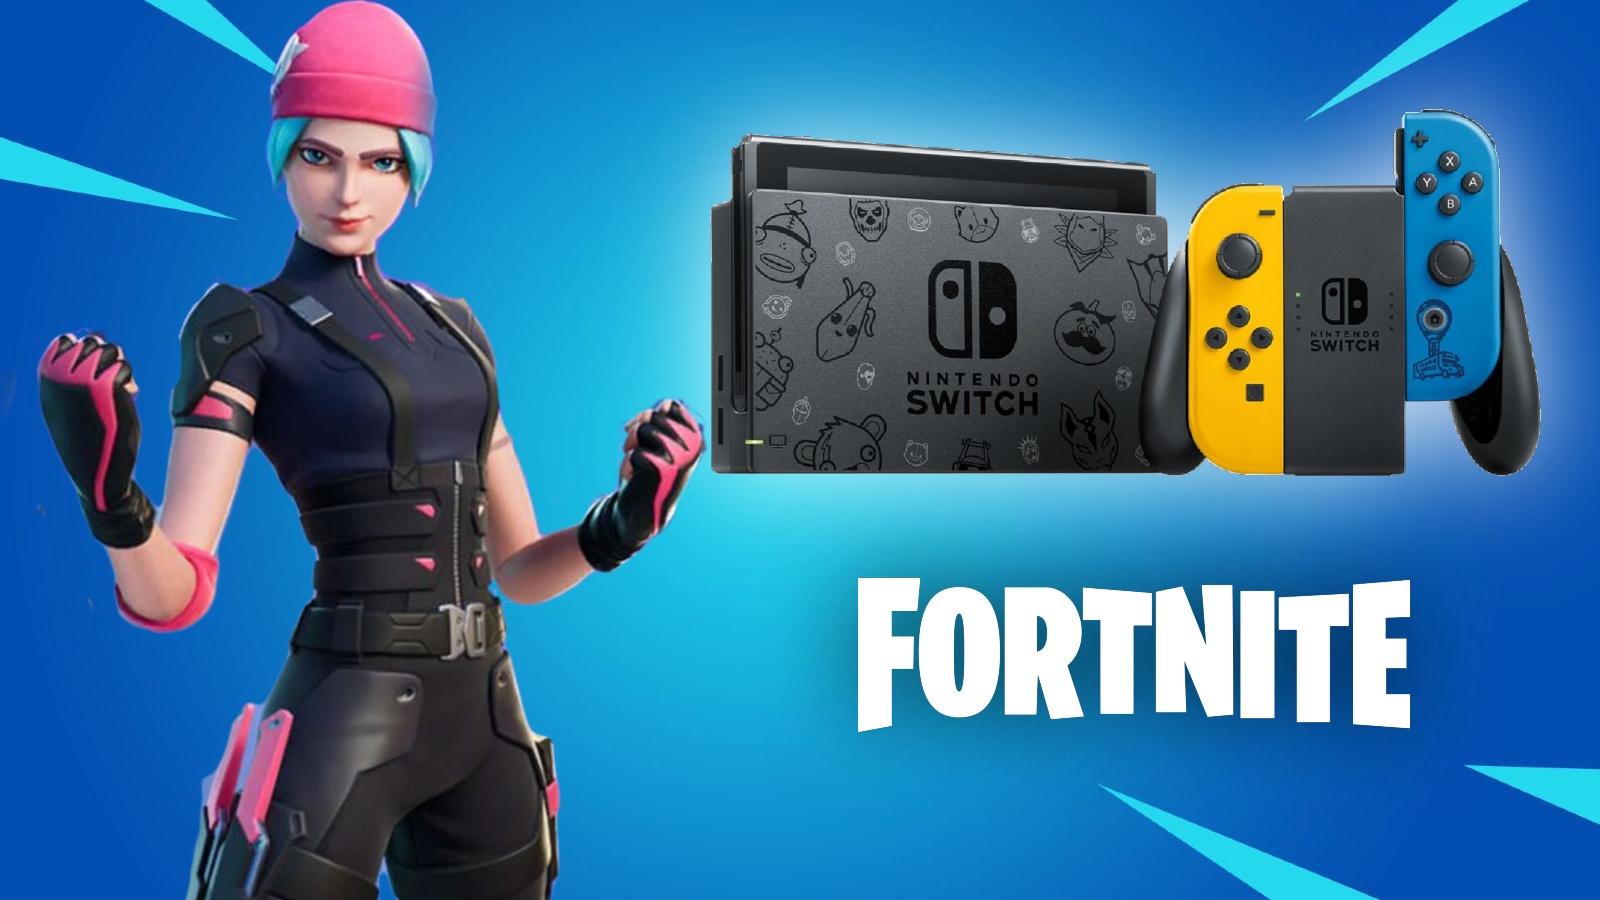 How to get Fortnite Wildcat Pack with Nintendo Switch exclusive